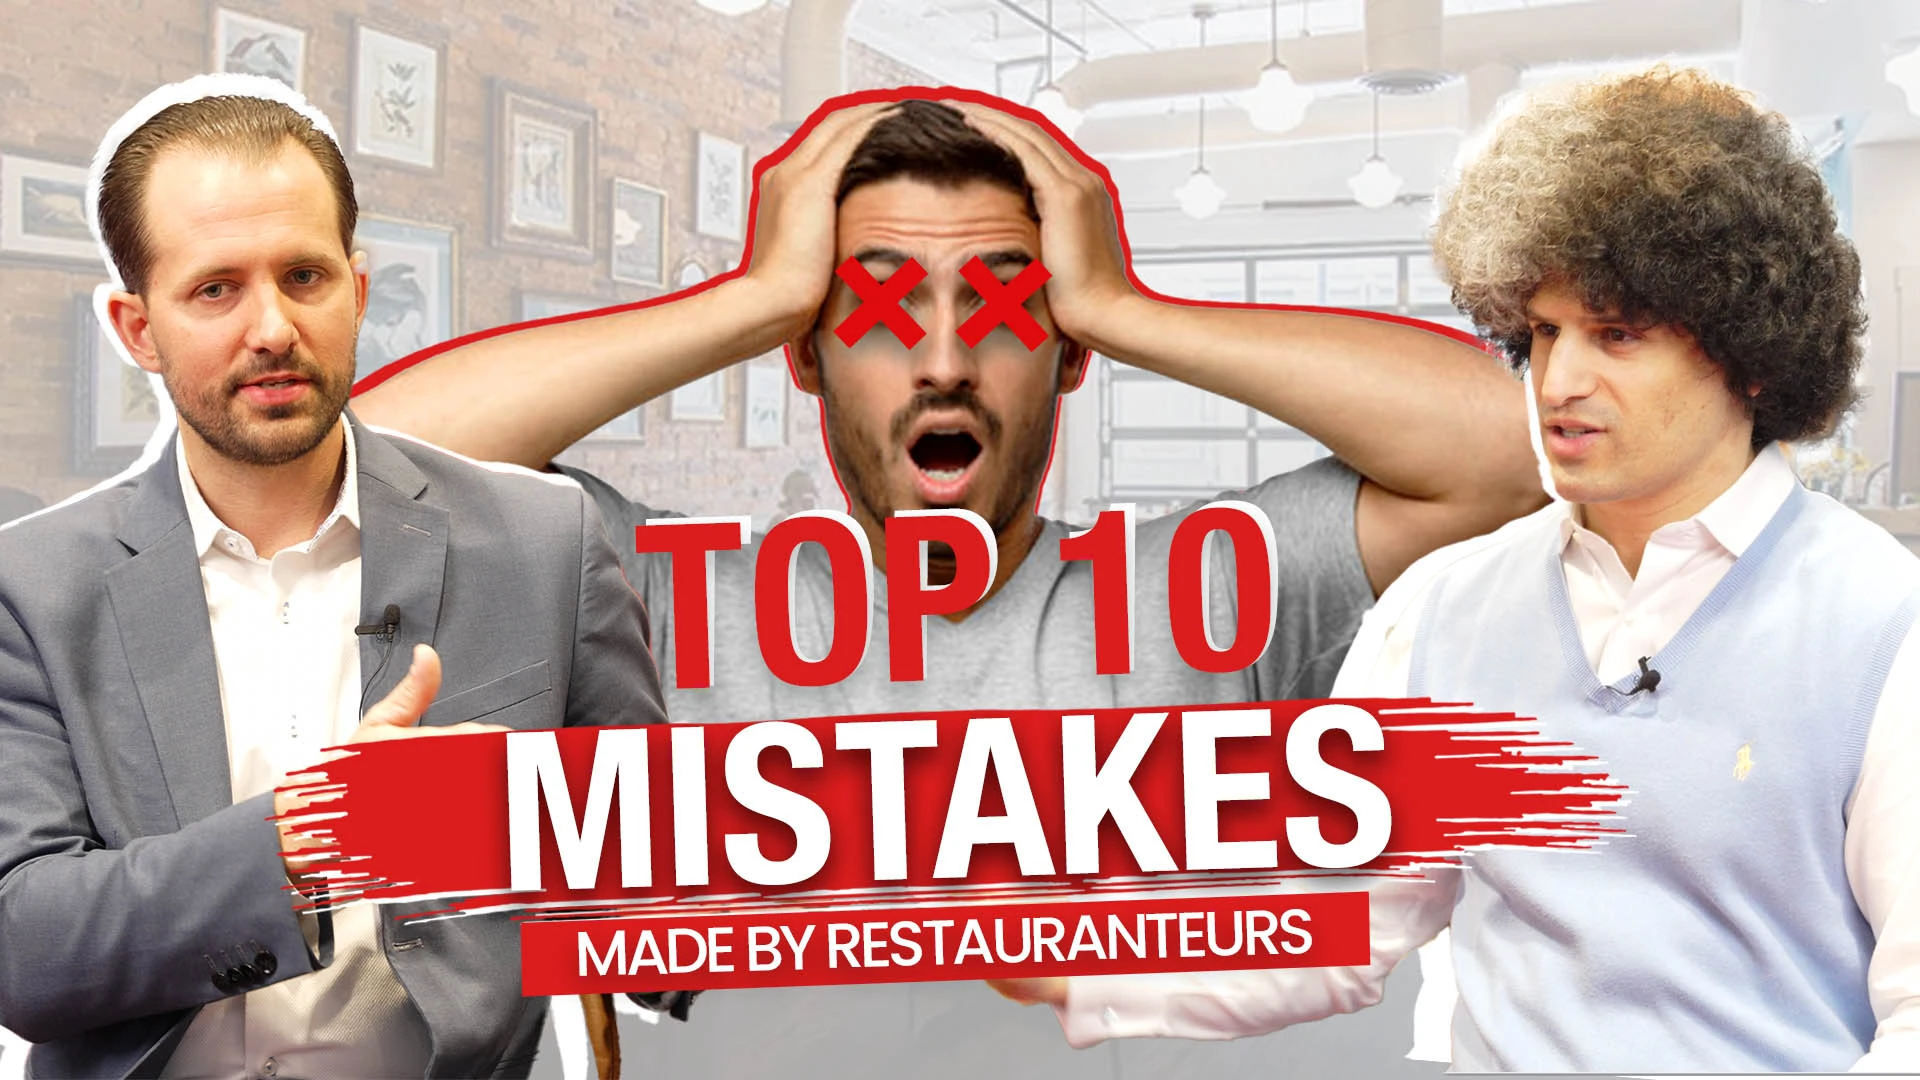 Top 10 mistakes made by restaurants Part 1